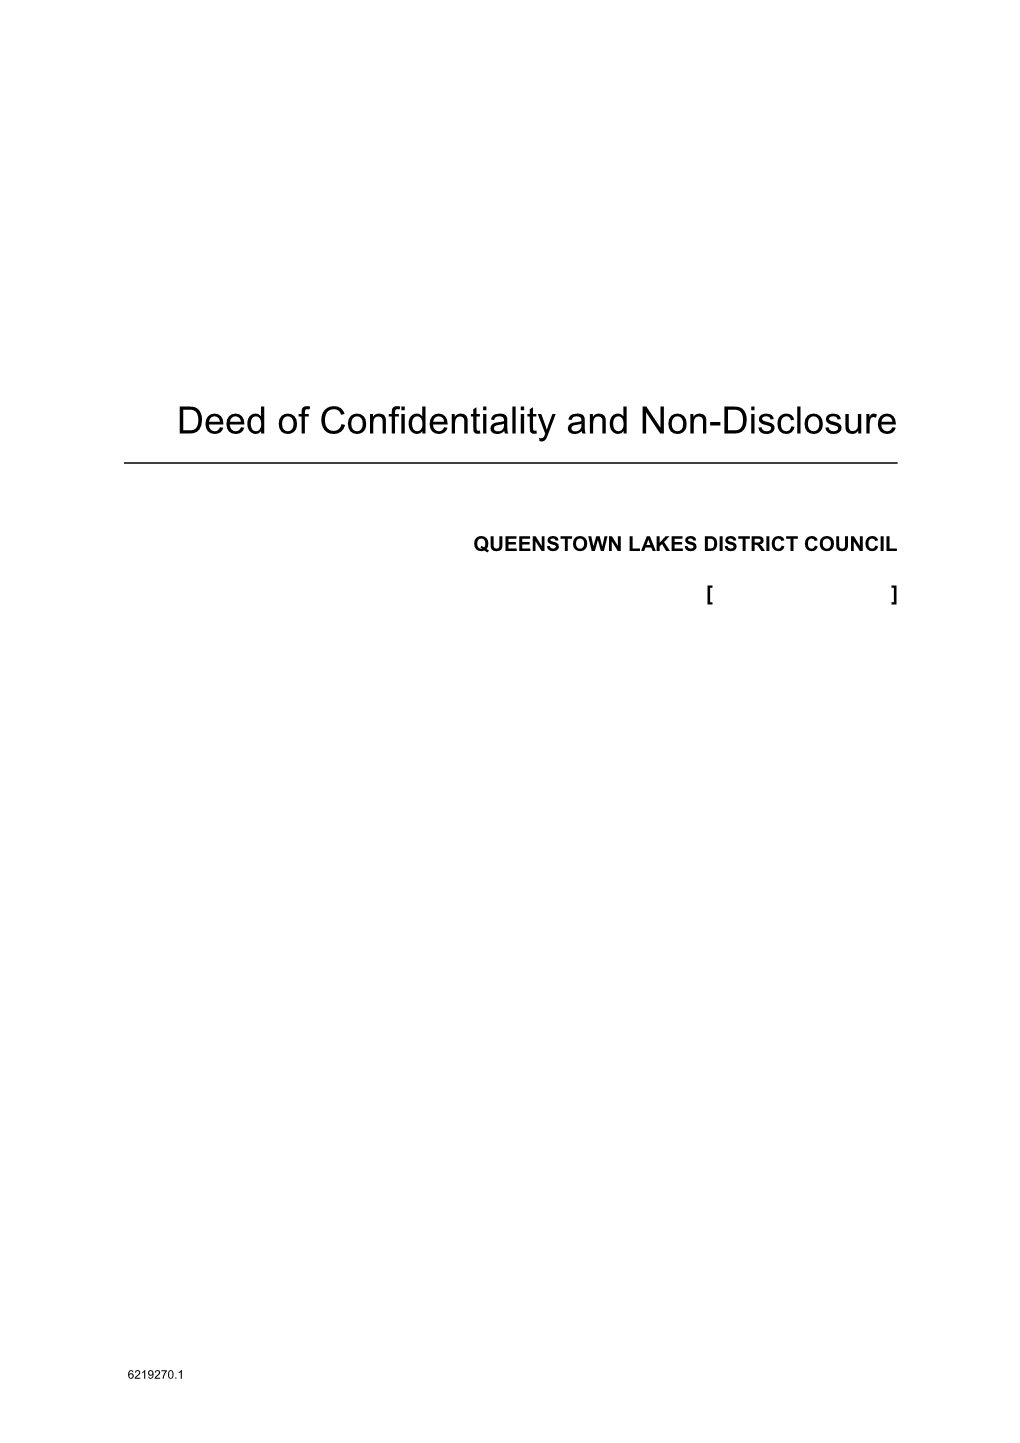 Deed of Confidentialityand Non-Disclosure